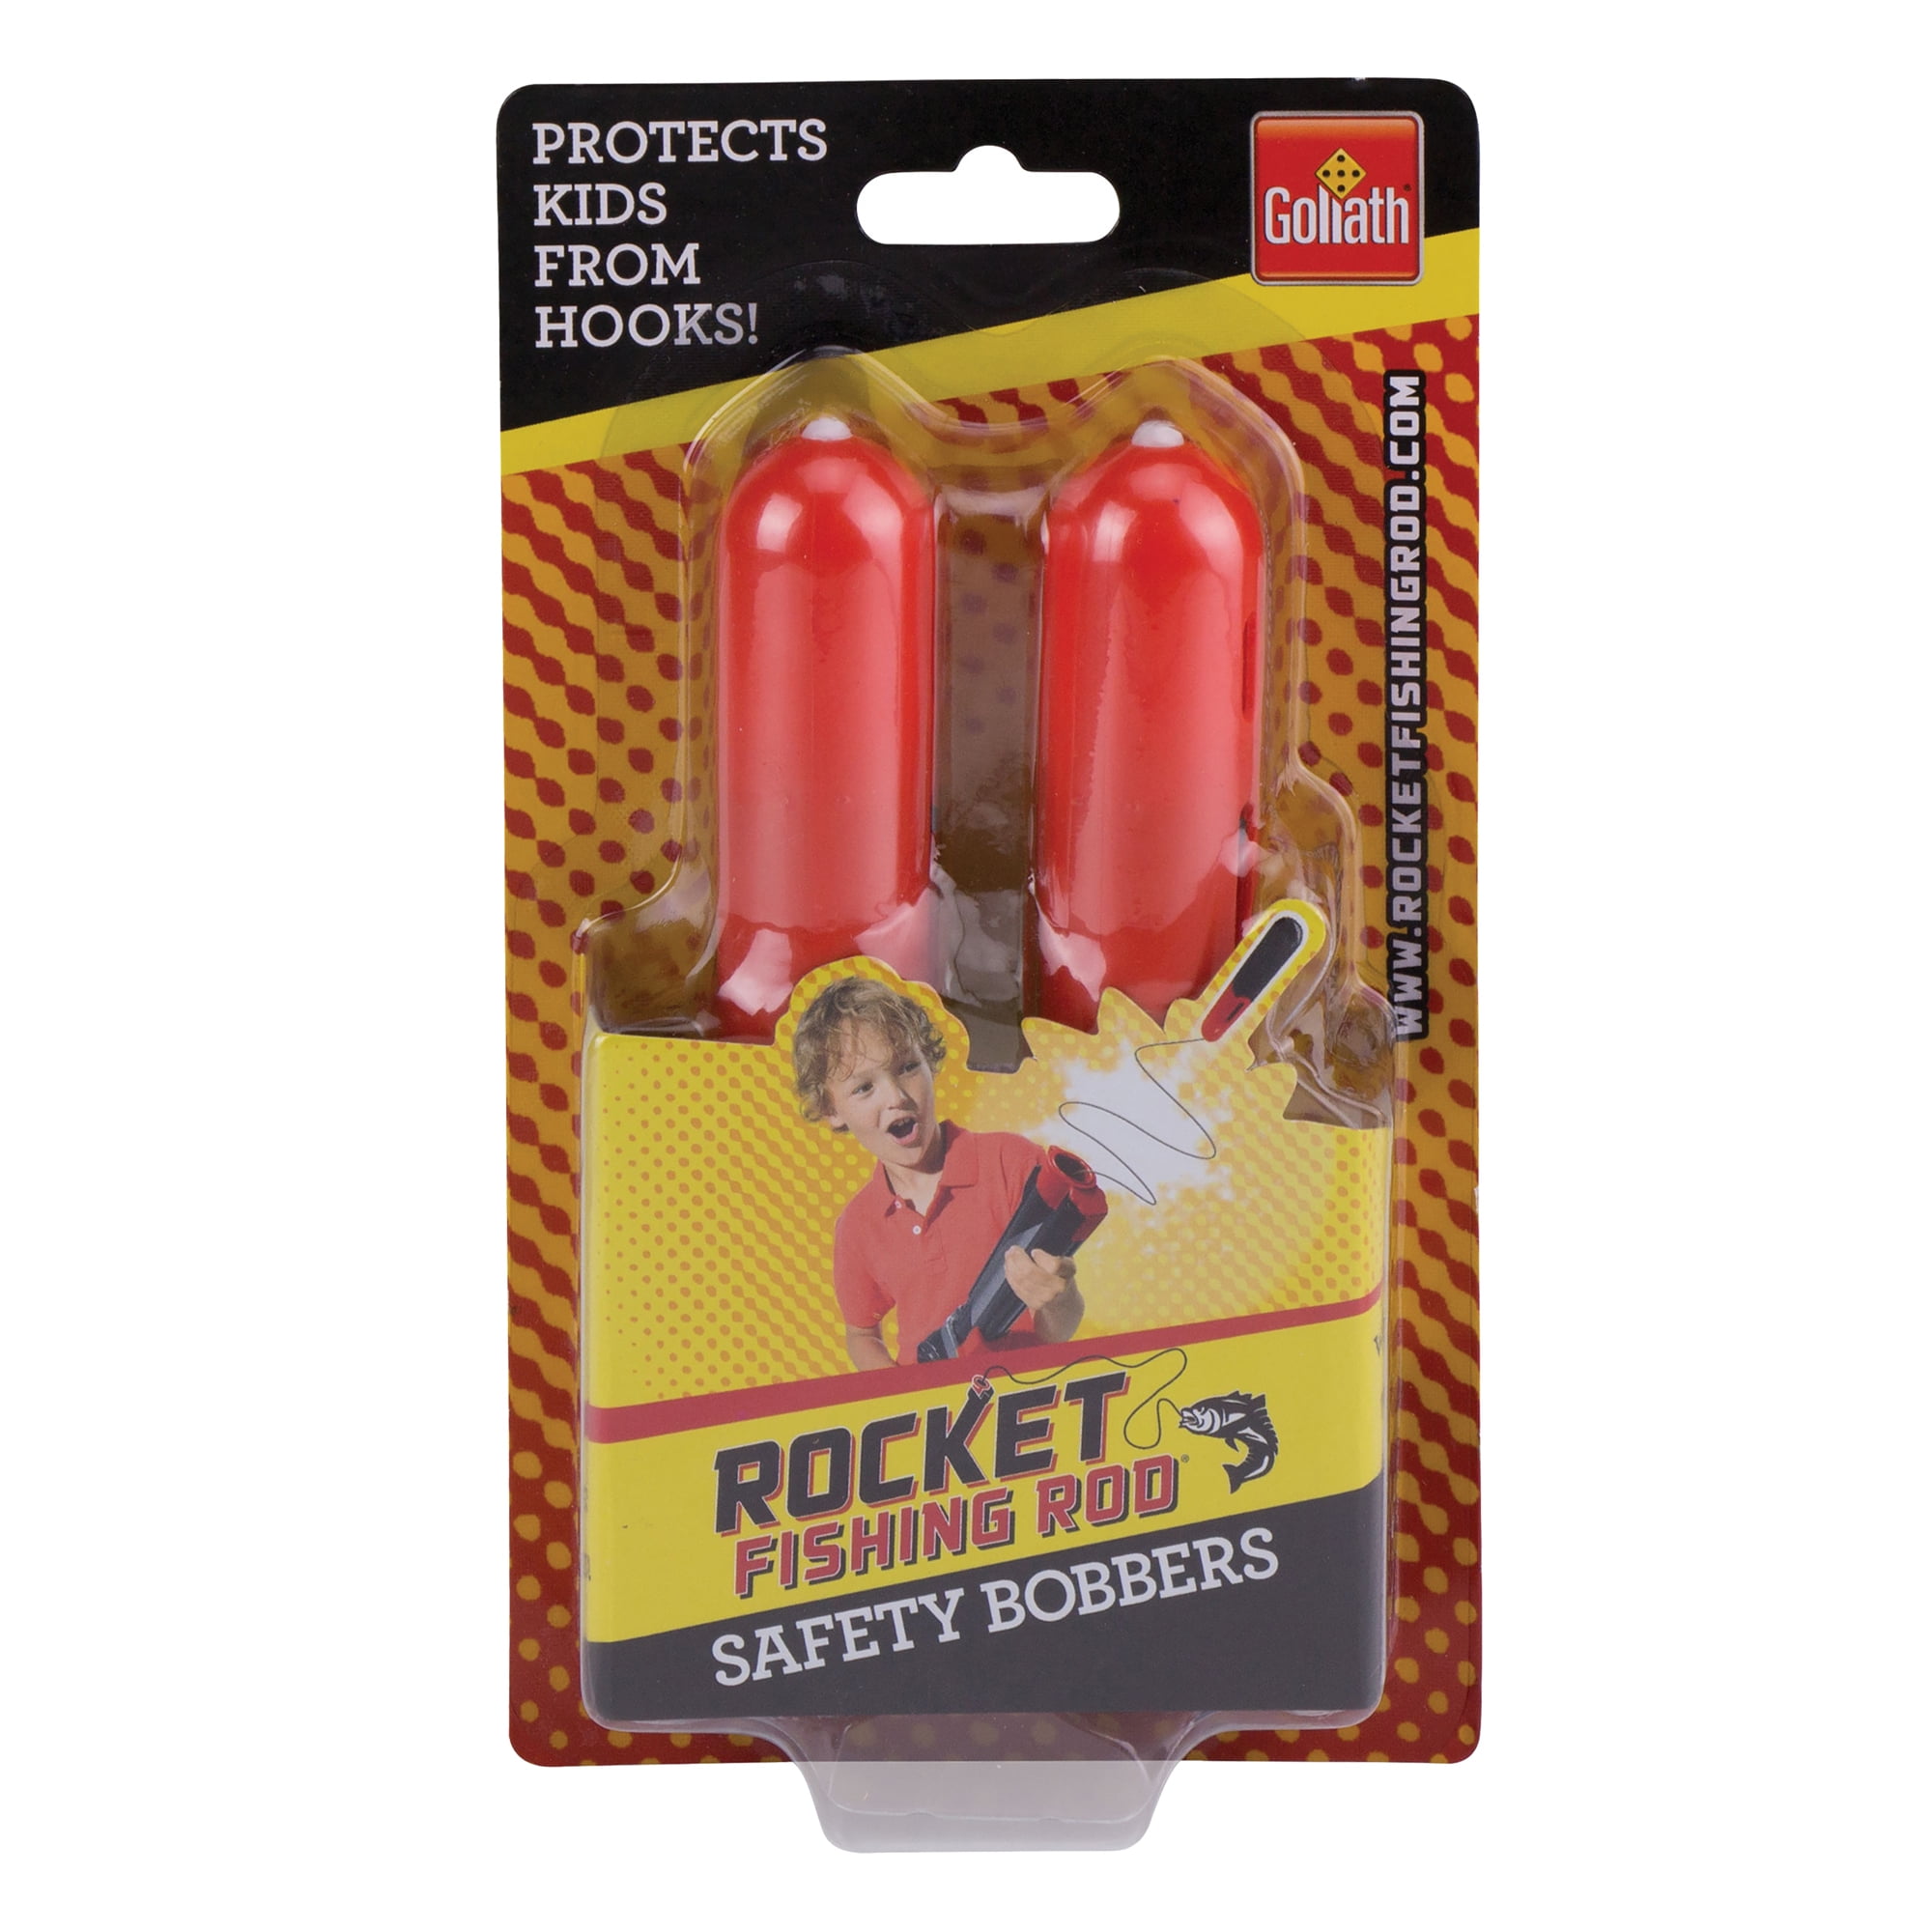  Rocket Fishing Rod - Ready to Fish Kids Fishing Pole - Shoots a  Bobber Instead of Casting : Sports & Outdoors